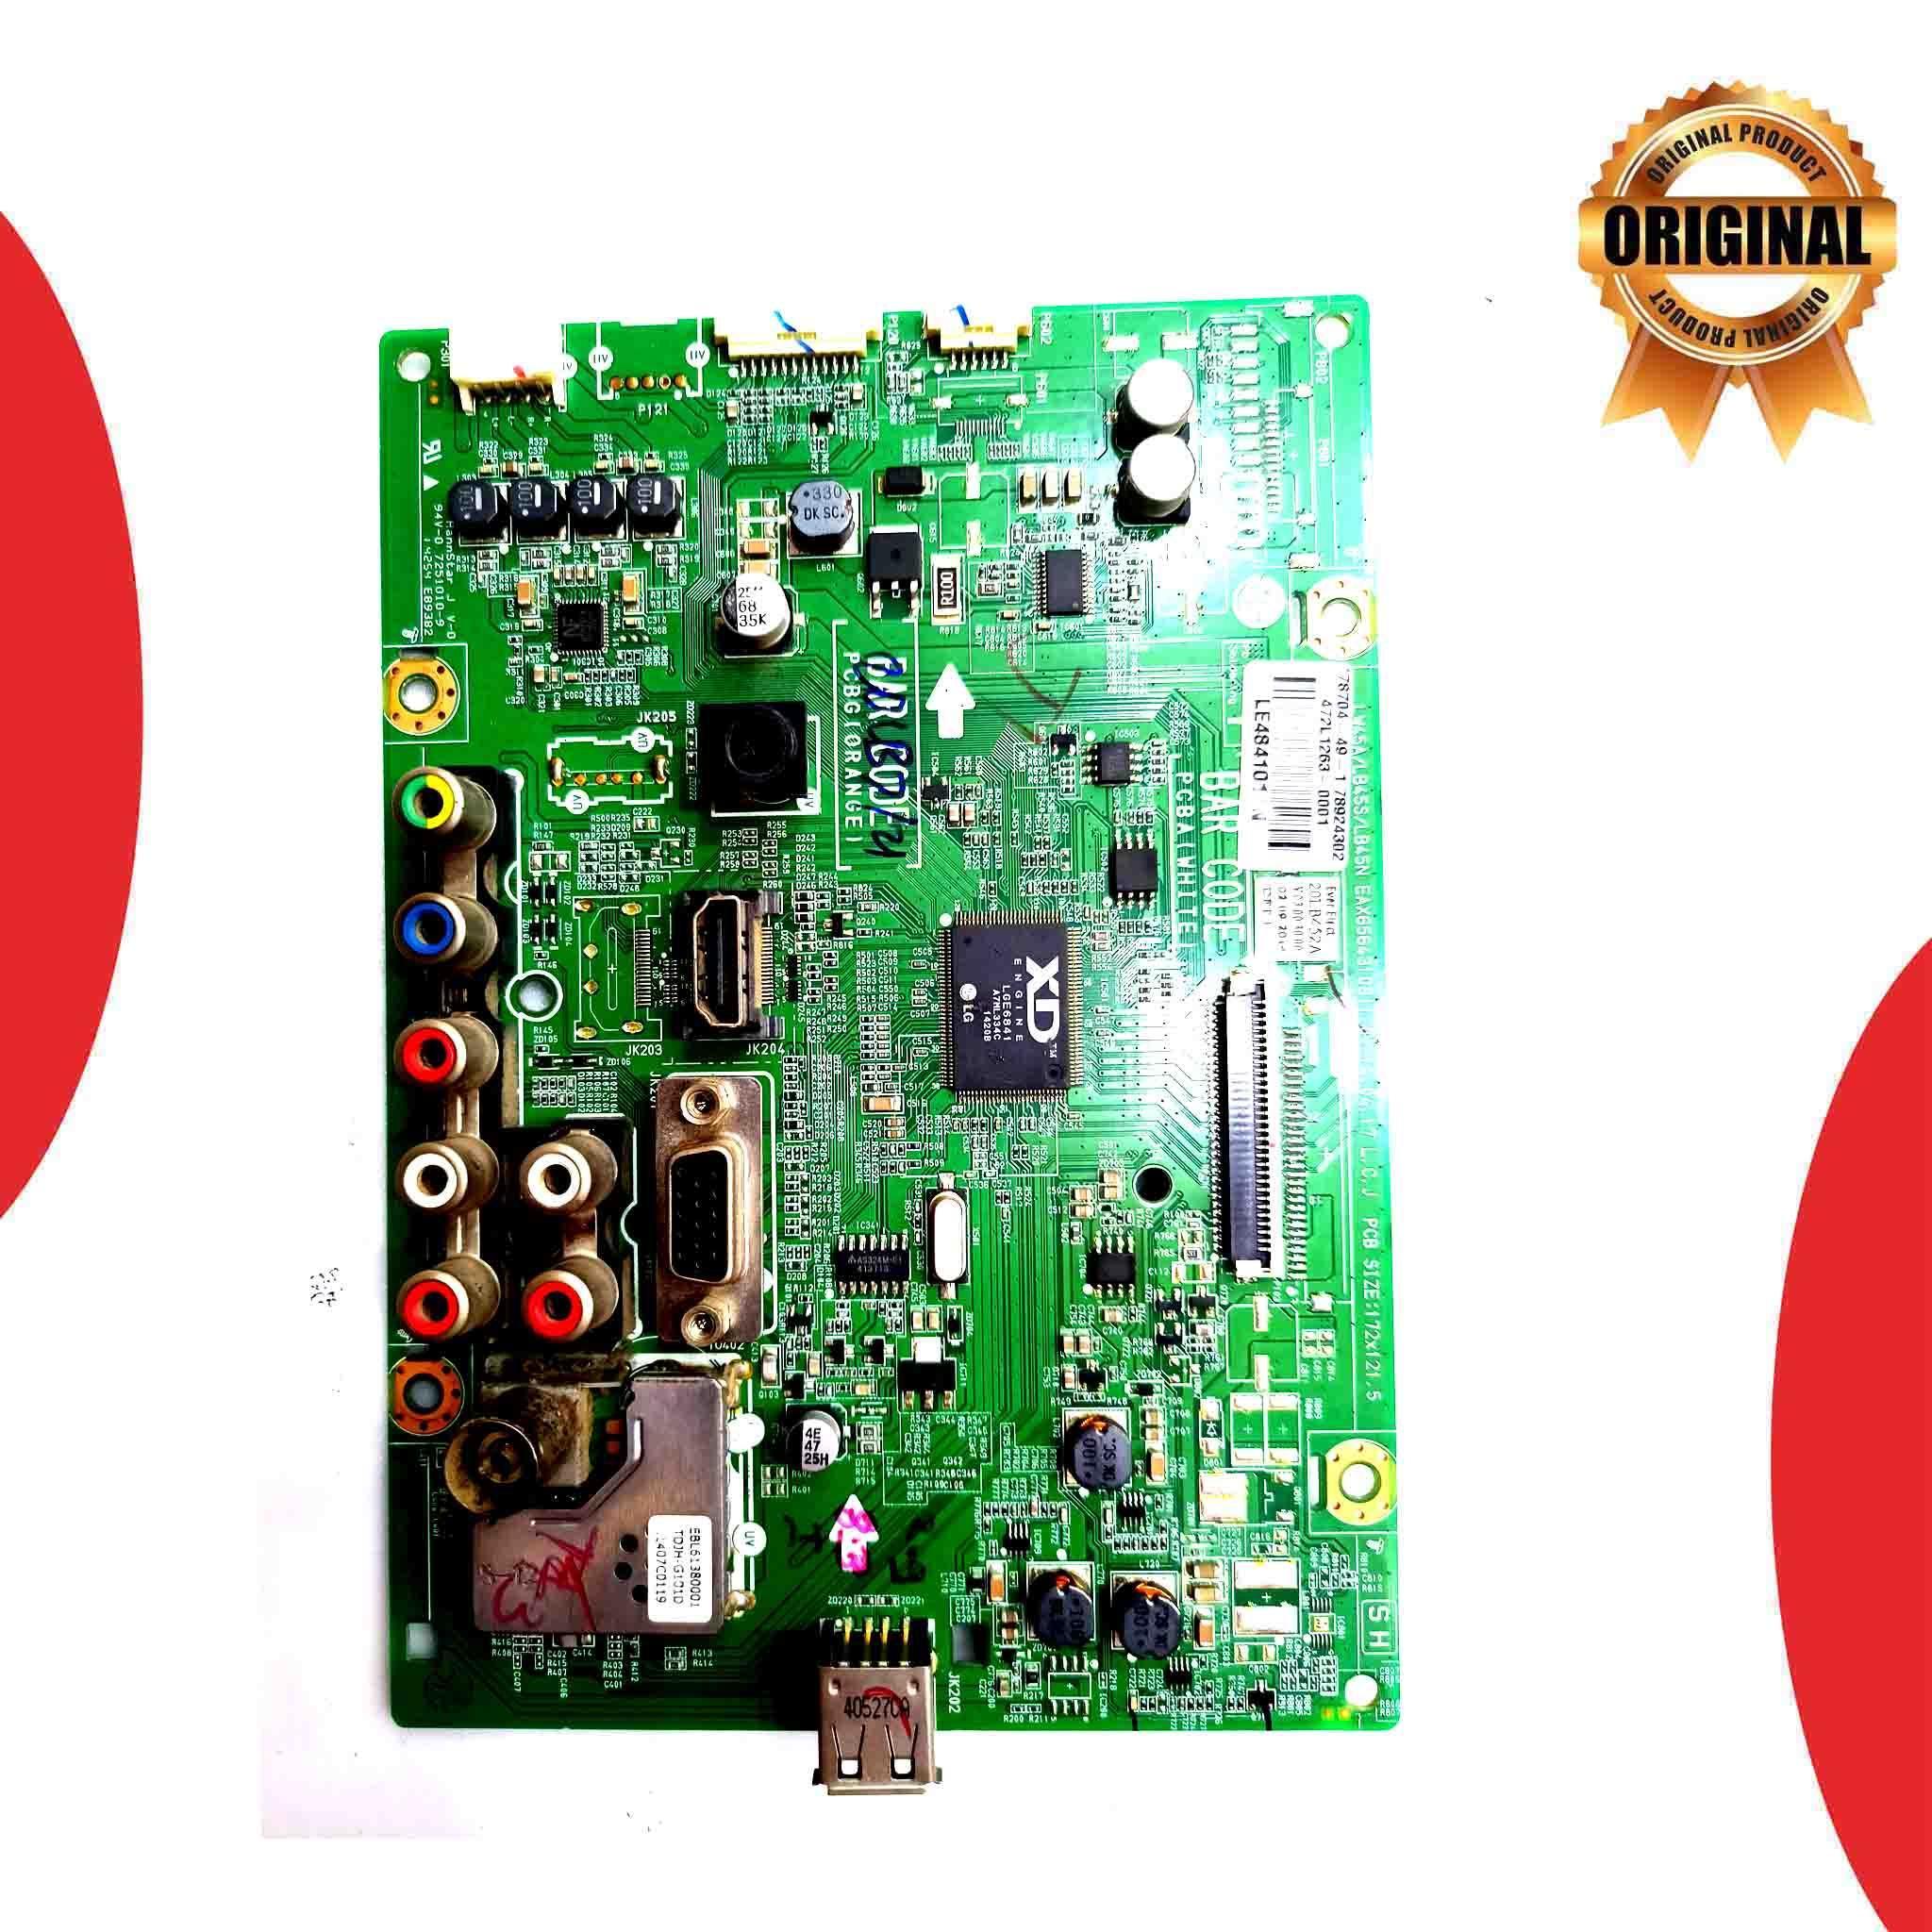 LG 20 inch LED TV Motherboard for Model 20LB452ATB - Great Bharat Electronics